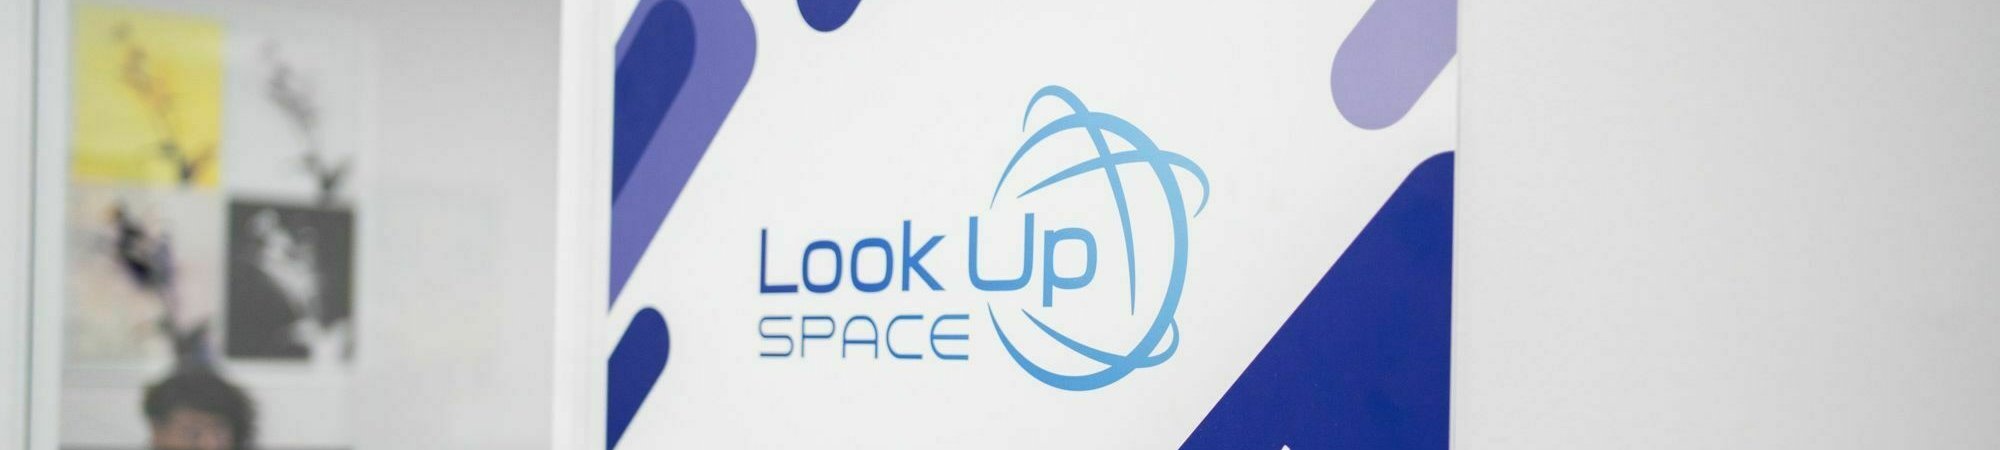 Look Up Space